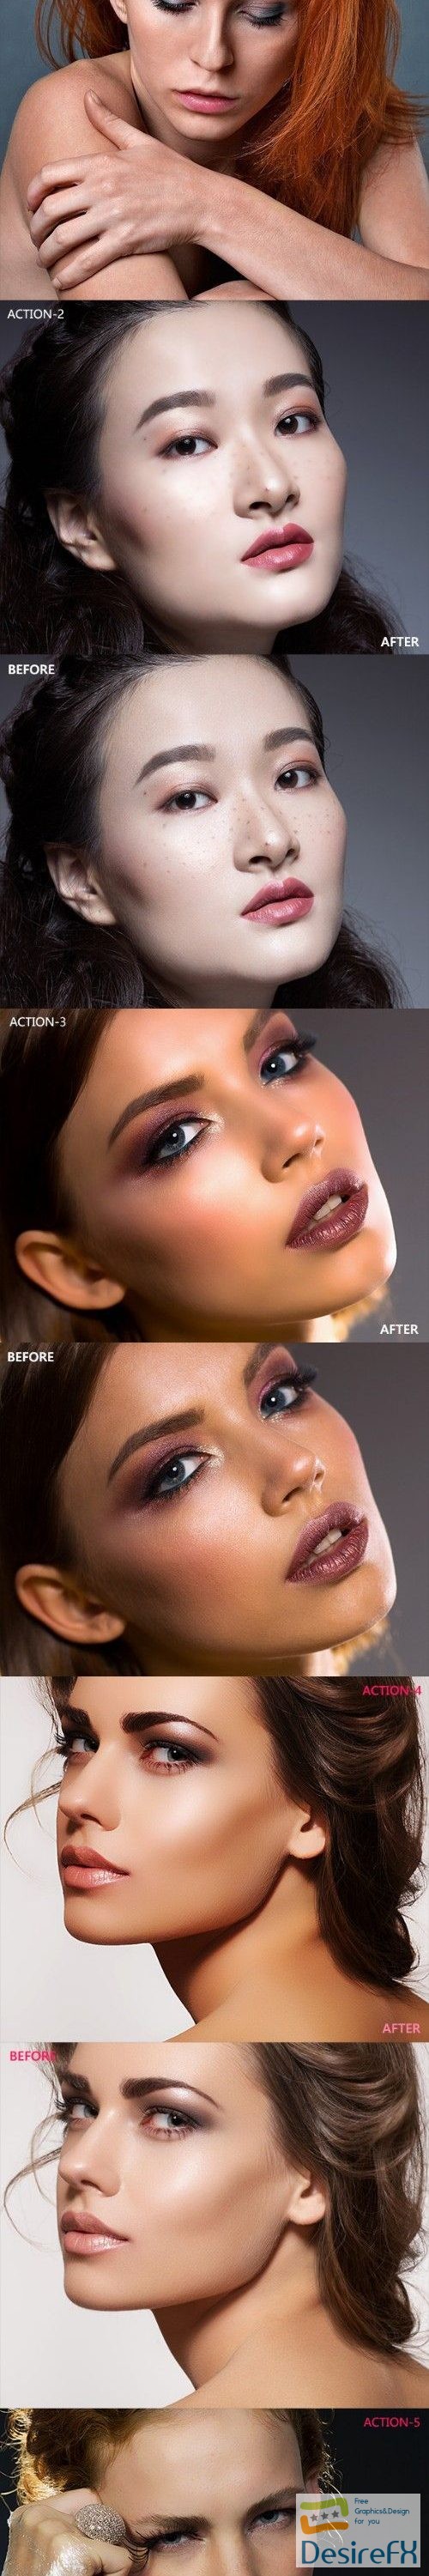 GraphicRiver - Creative Retouch Photoshop Action Photo Effects 21405013